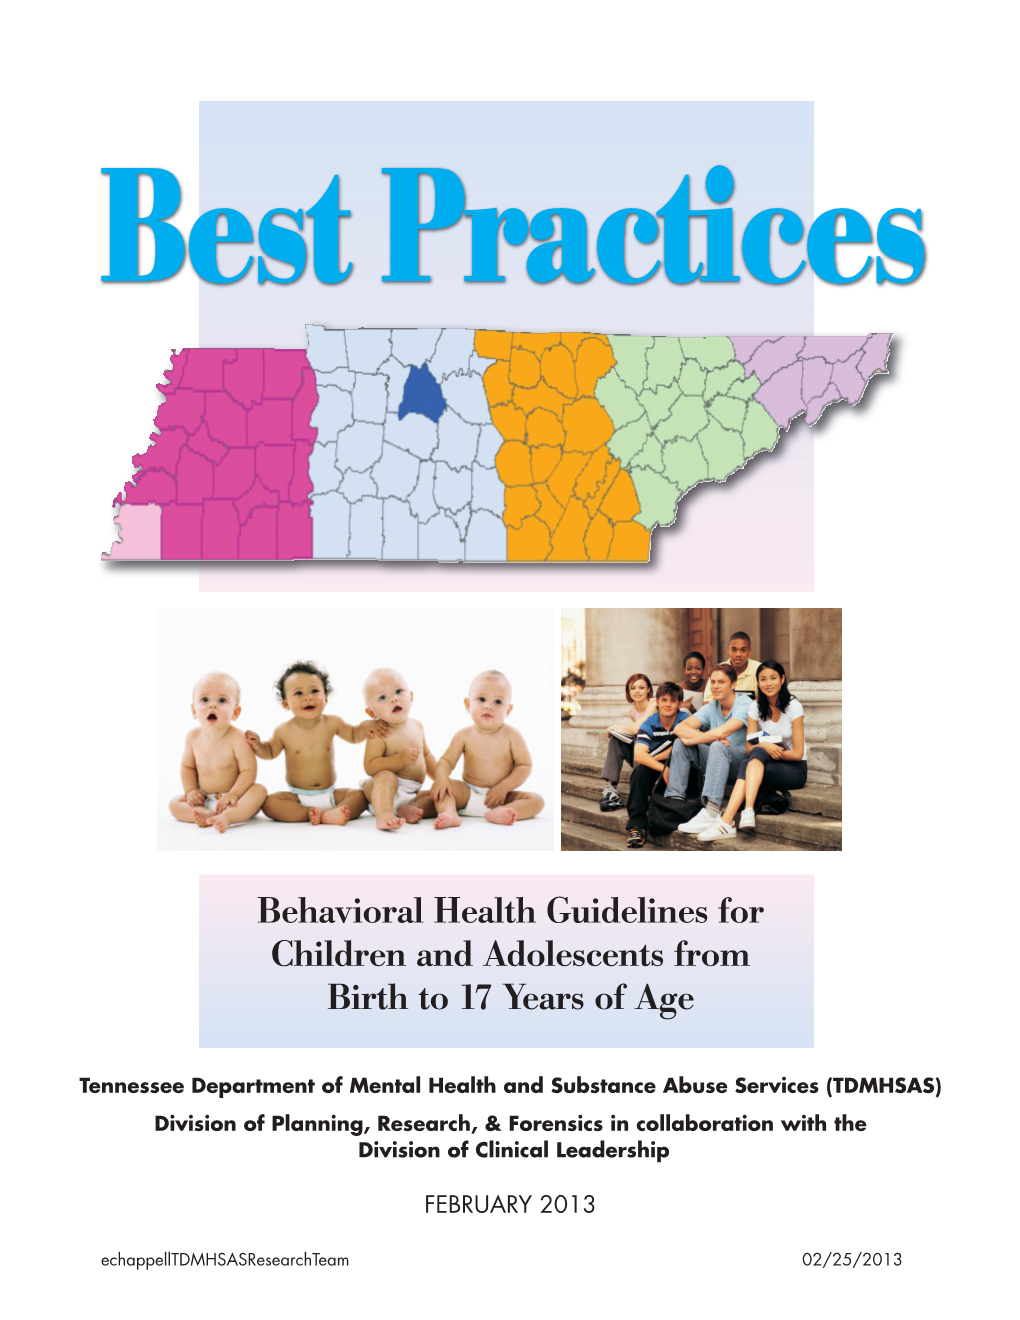 Behavioral Health Guidelines for Children and Adolescents from Birth to 17 Years of Age